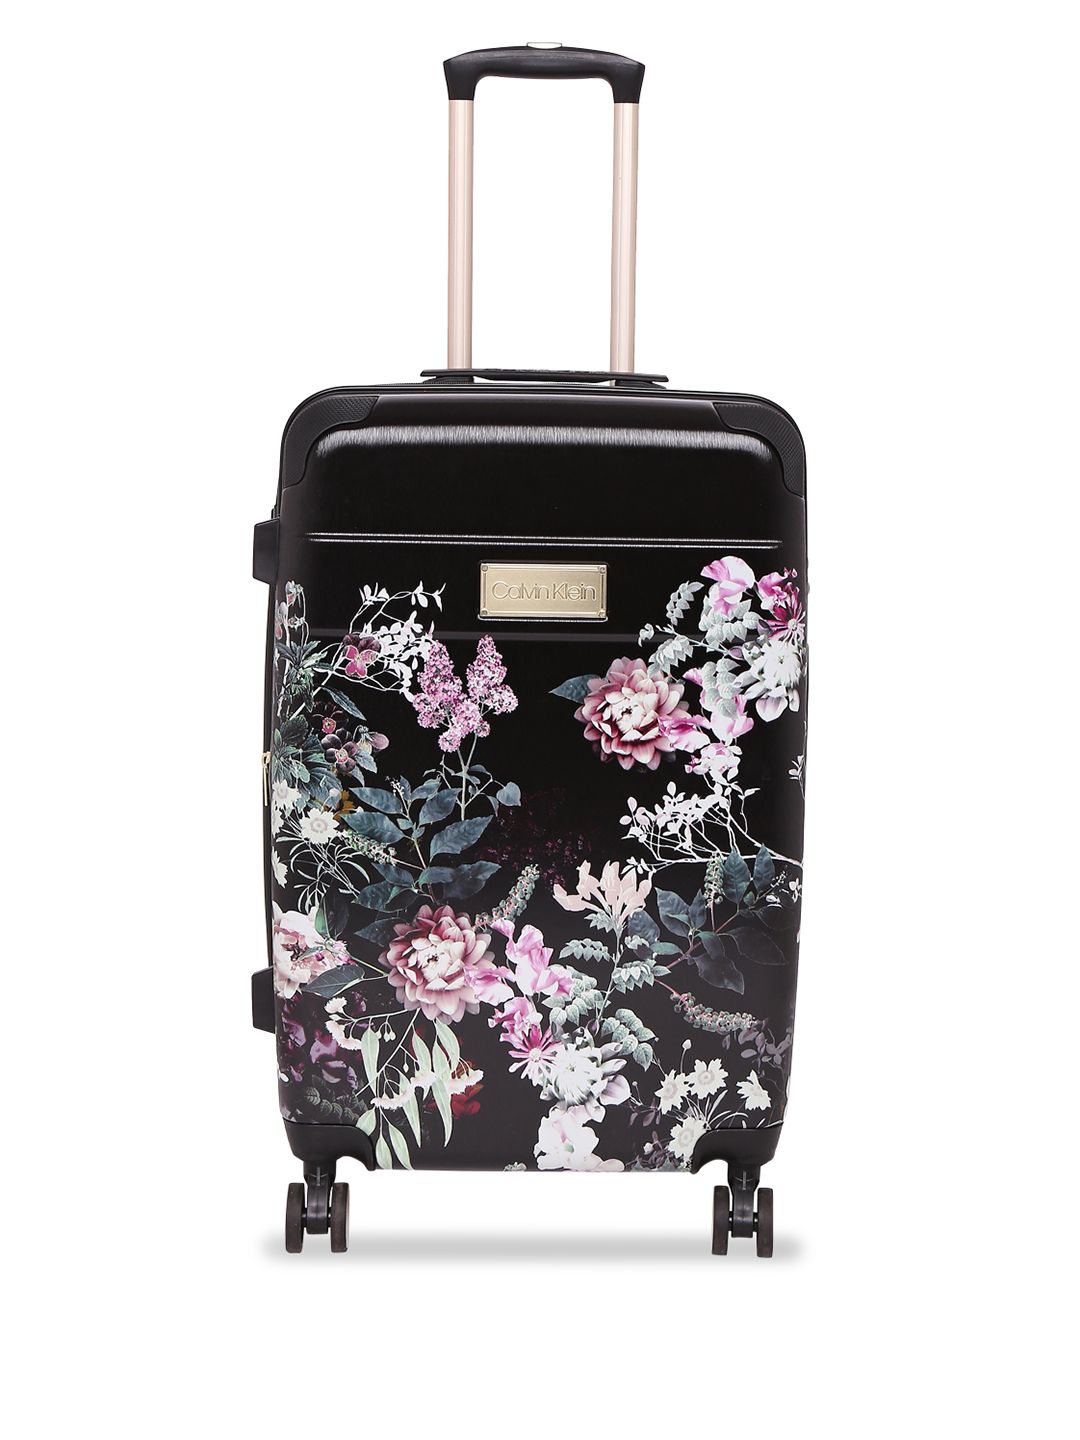 Calvin Klein Unisex Black Floral Print Mille HS Hard-Sided Large Trolley Suitcase Price in India